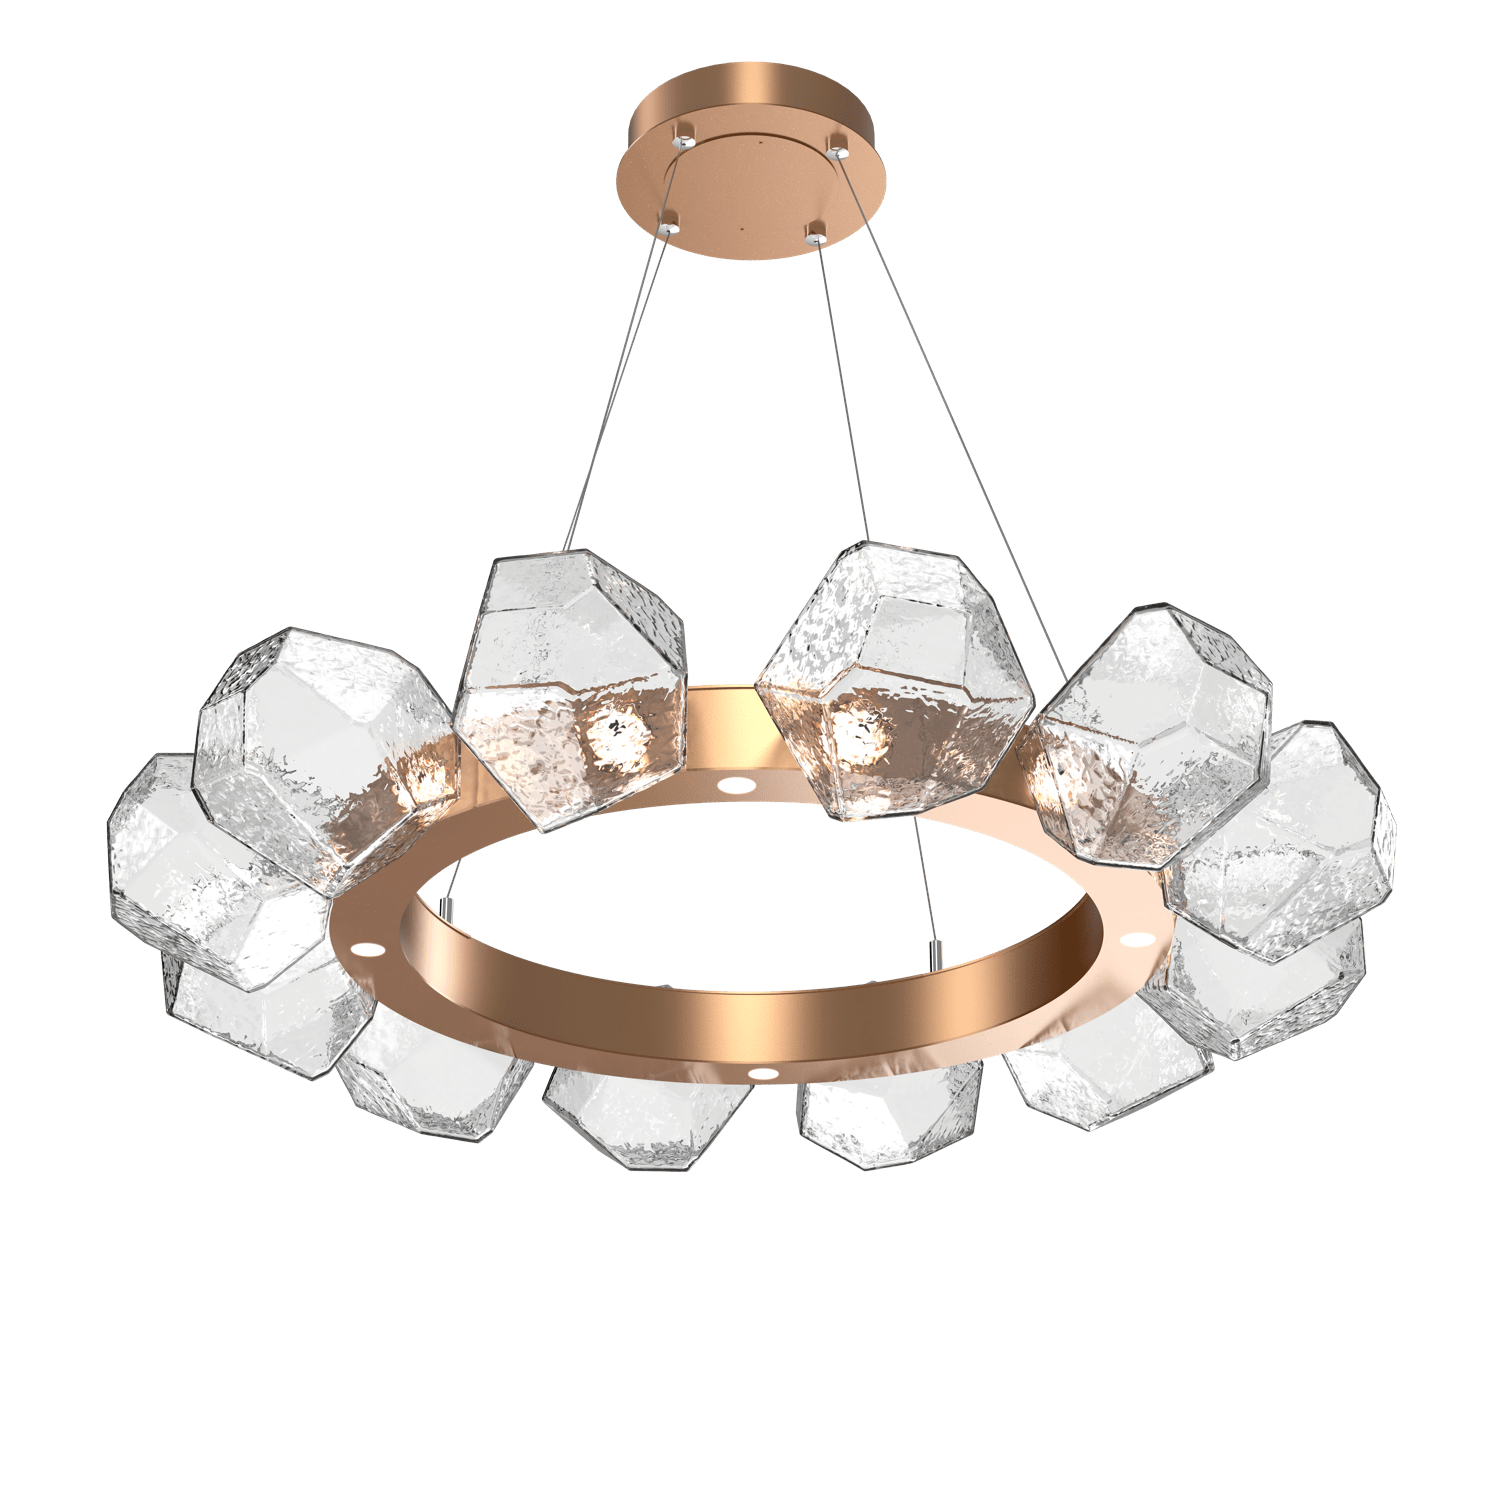 CHB0039-36-NB-C-Hammerton-Studio-Gem-36-inch-radial-ring-chandelier-with-novel-brass-finish-and-clear-blown-glass-shades-and-LED-lamping